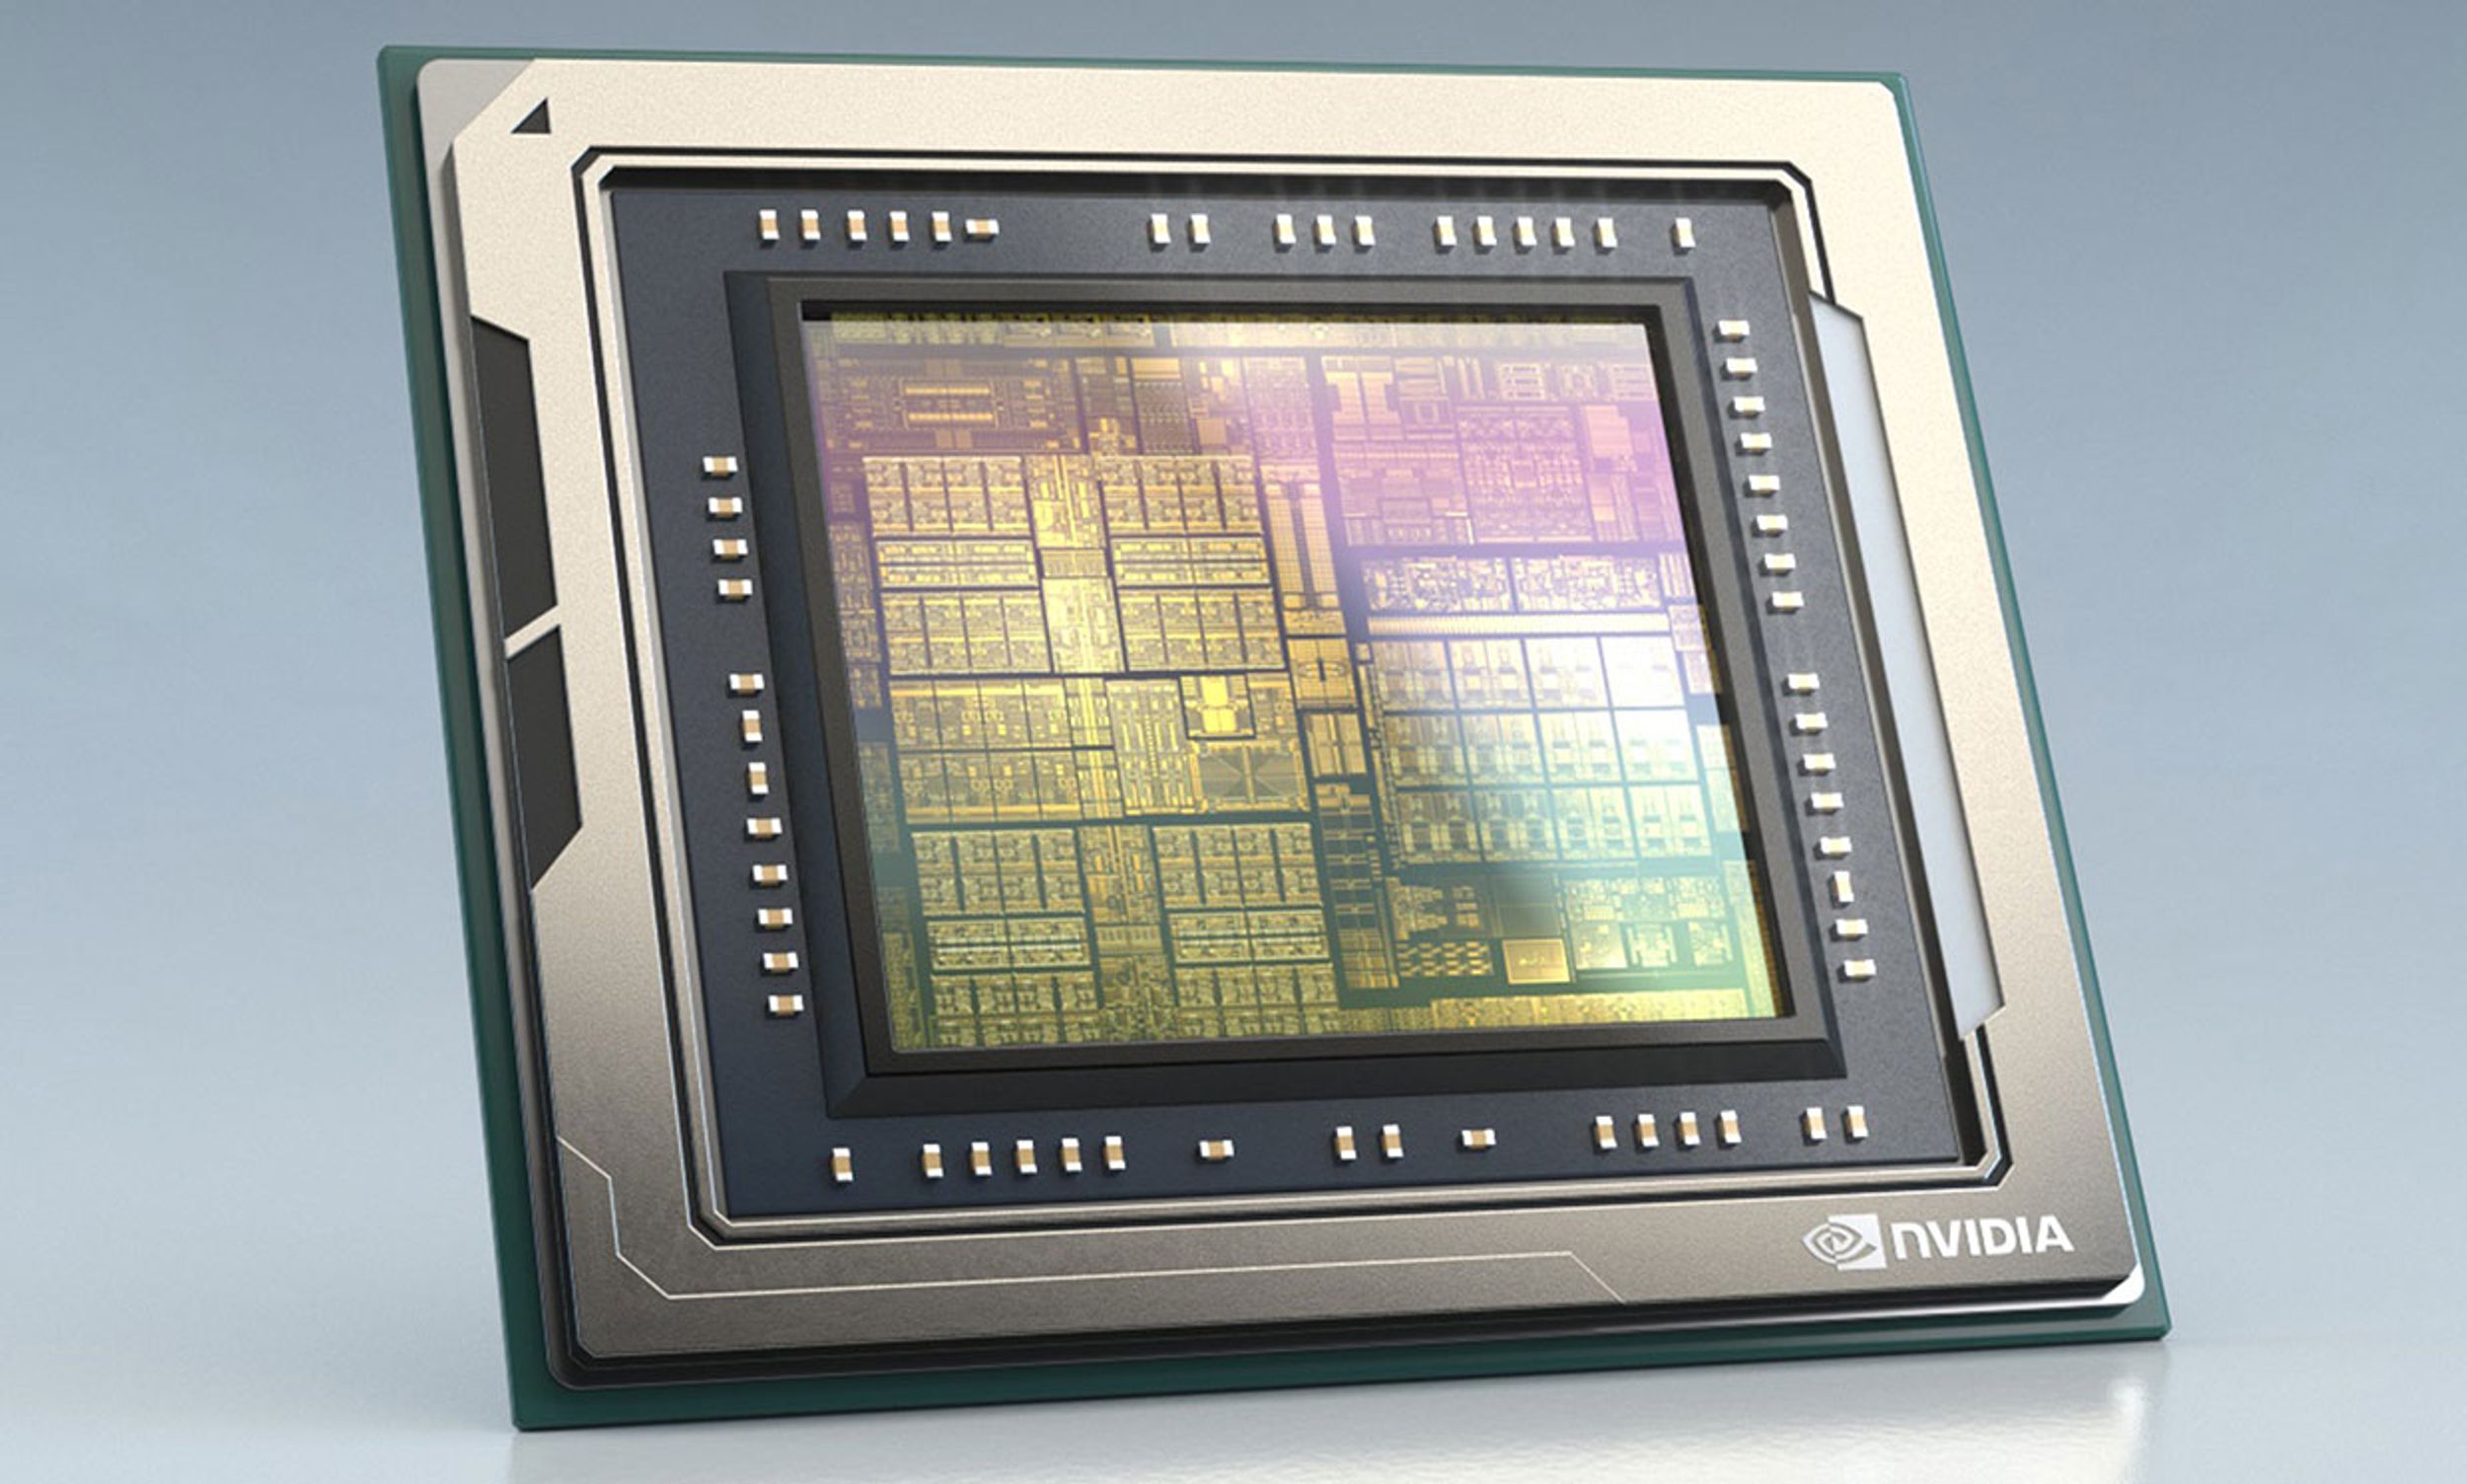 NVIDIA's Orin is a system-on-a-chip (SoC) which consists of 17 billion transistors and delivers 200 trillion operations per second.